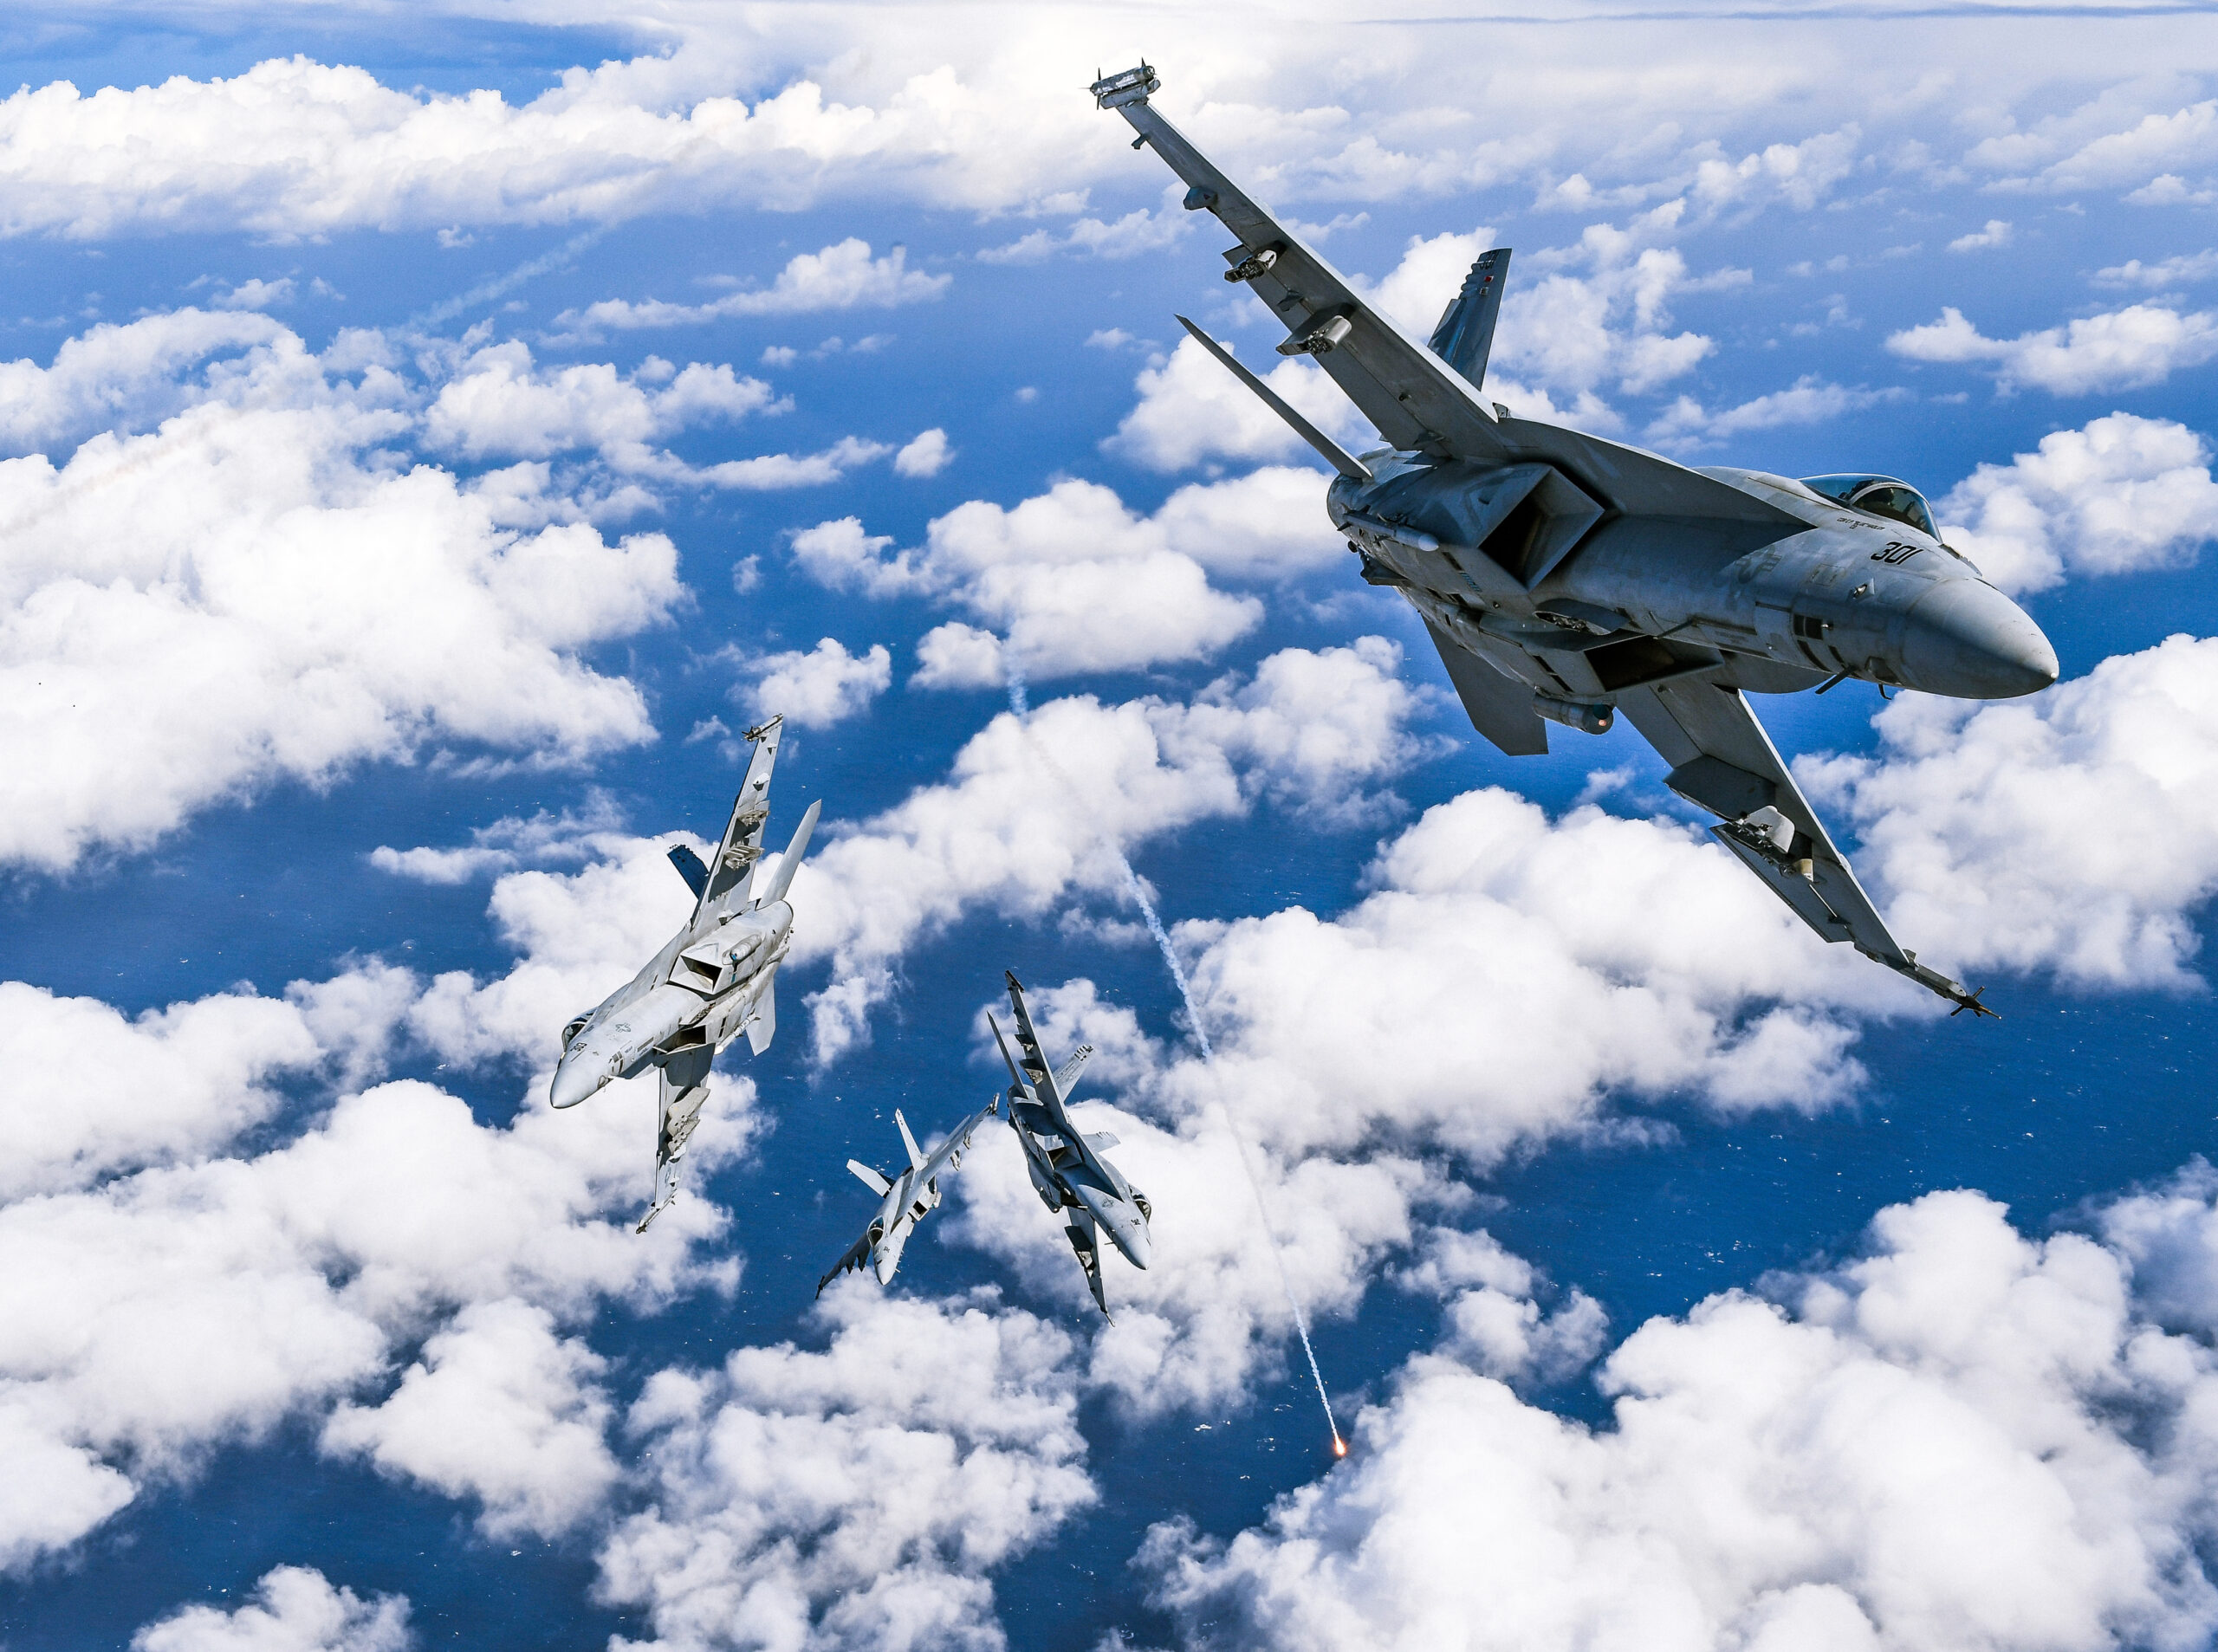 190227-N-FC670-0959 PACIFIC OCEAN (March 12, 2019) F/A-18E Super Hornets from Strike Fighter Squadron (VFA) 136 “Knighthawks” fly in formation during a photo exercise over Calif.  The Knighthawks are an operational U.S. Navy strike fighter squadron based at Naval Air Station Lemoore (NASL), Calif. and are attached to Carrier Air Wing (CVW) One. (U.S. Navy photo by Chief Mass Communication Specialist Shannon Renfroe/Released)